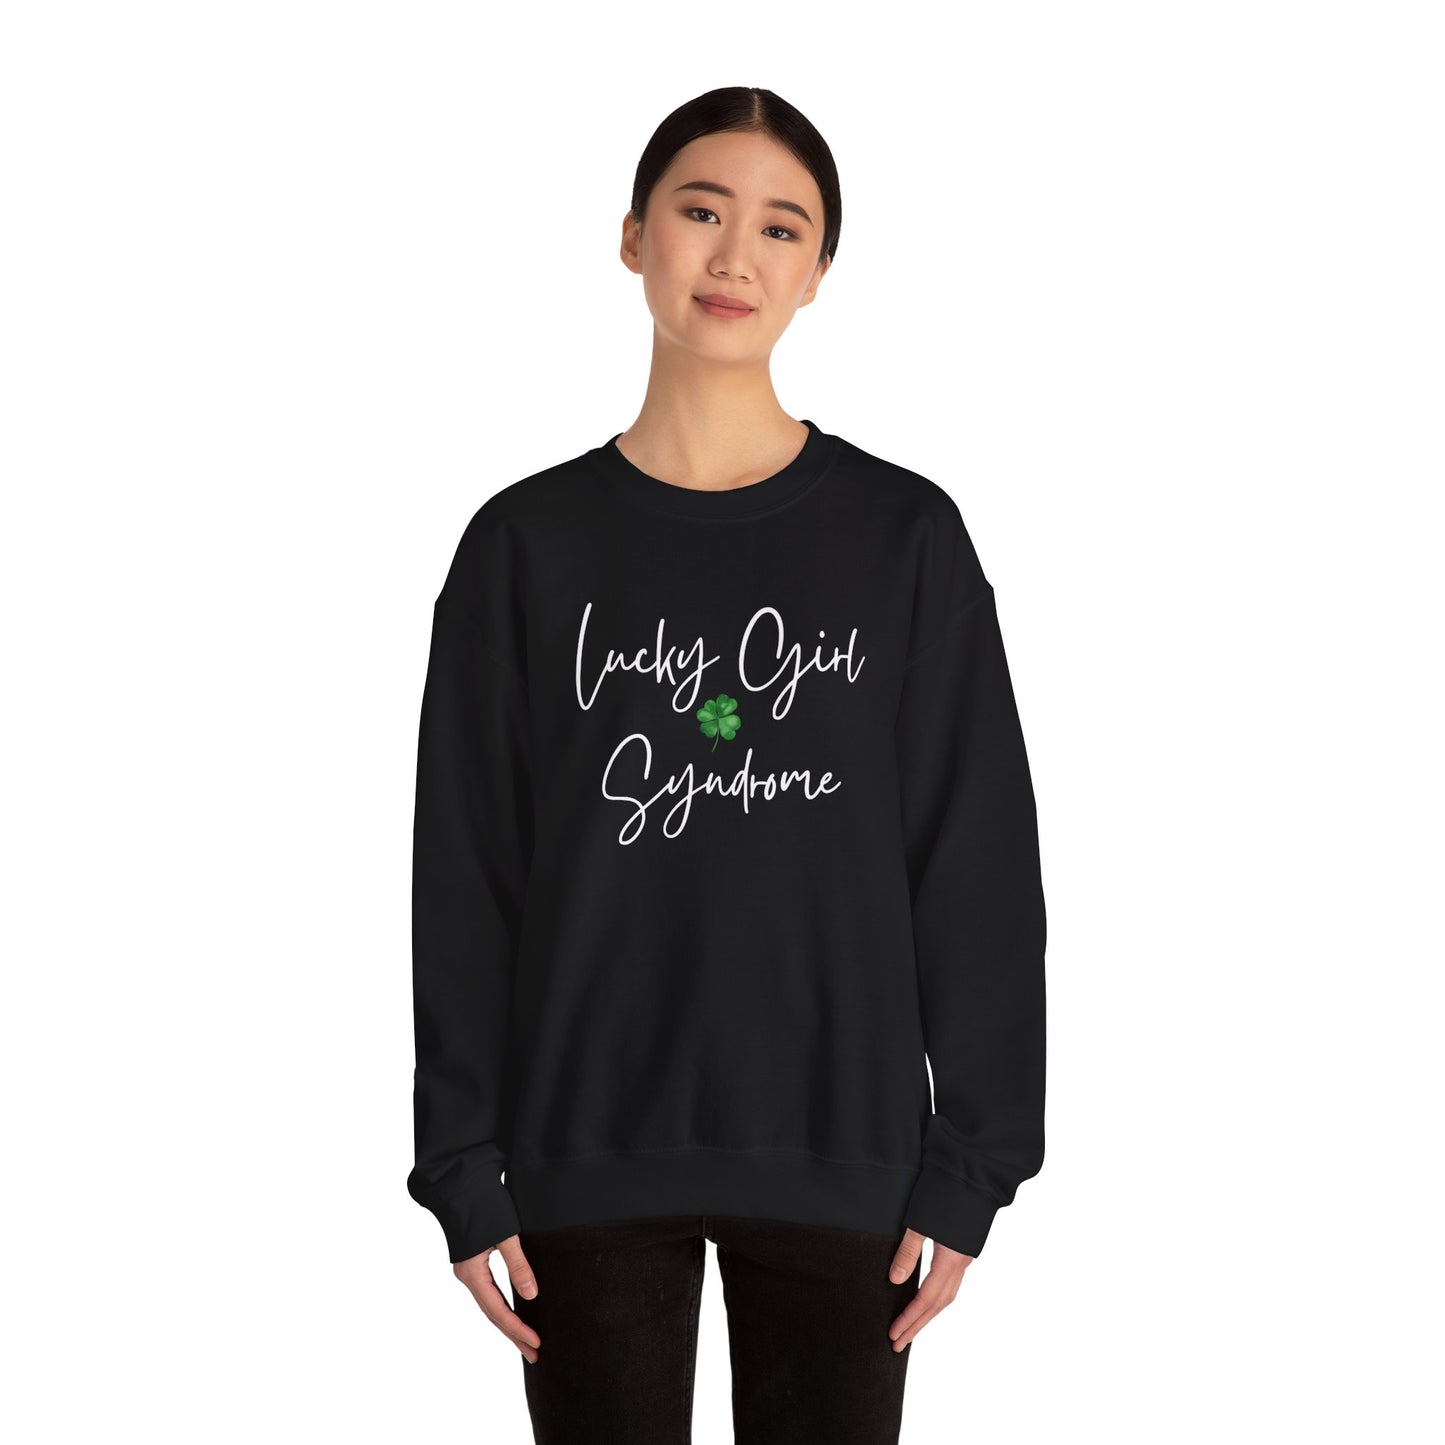 "It Girl Collection" Lucky Girl Syndrome - Black